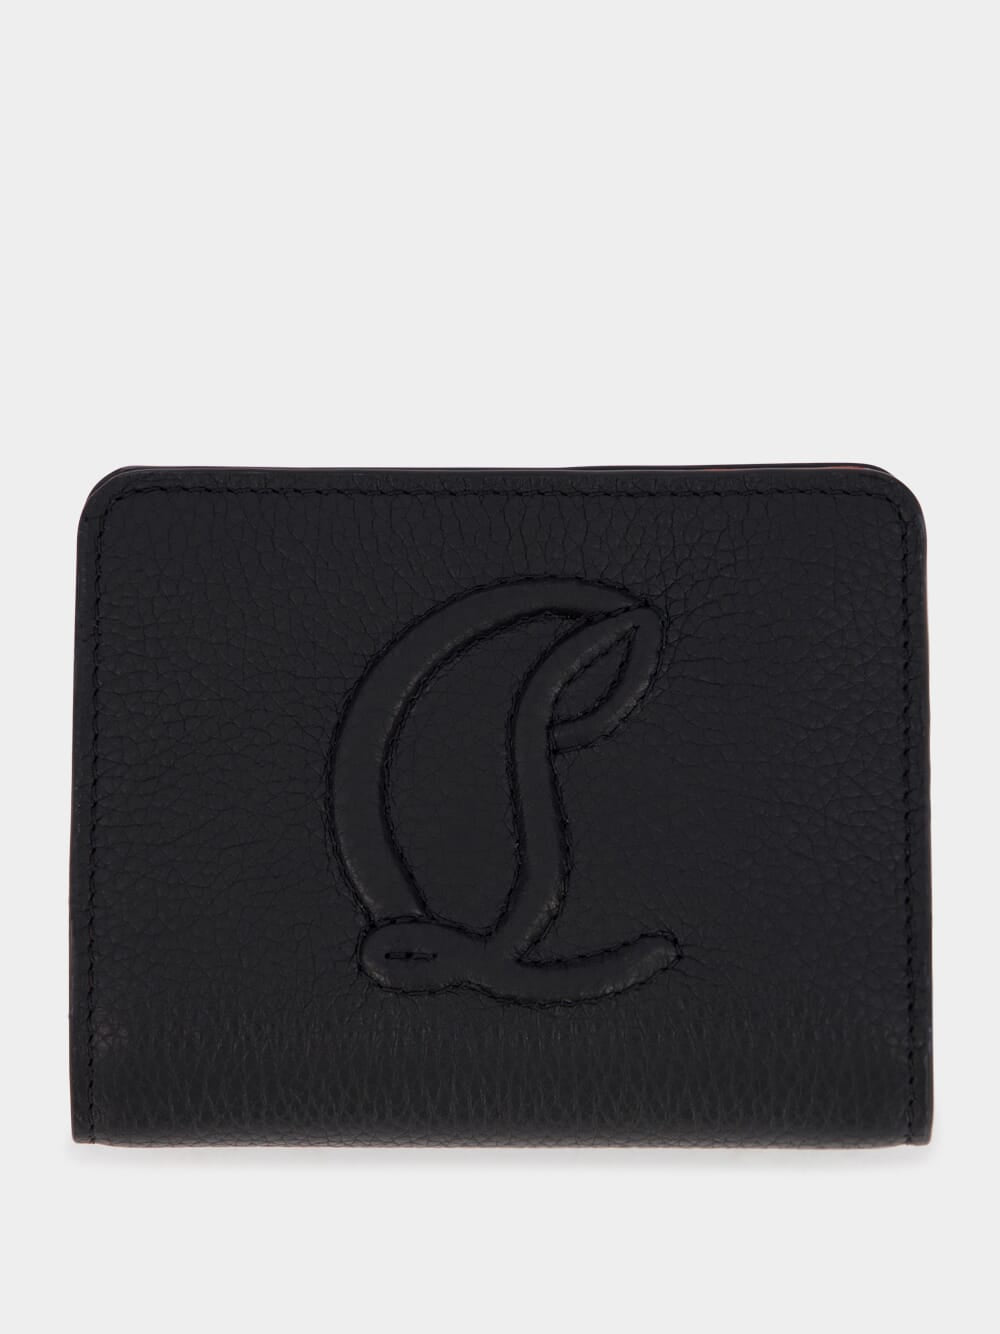 Christian LouboutinBy My Side Leather Wallet at Fashion Clinic